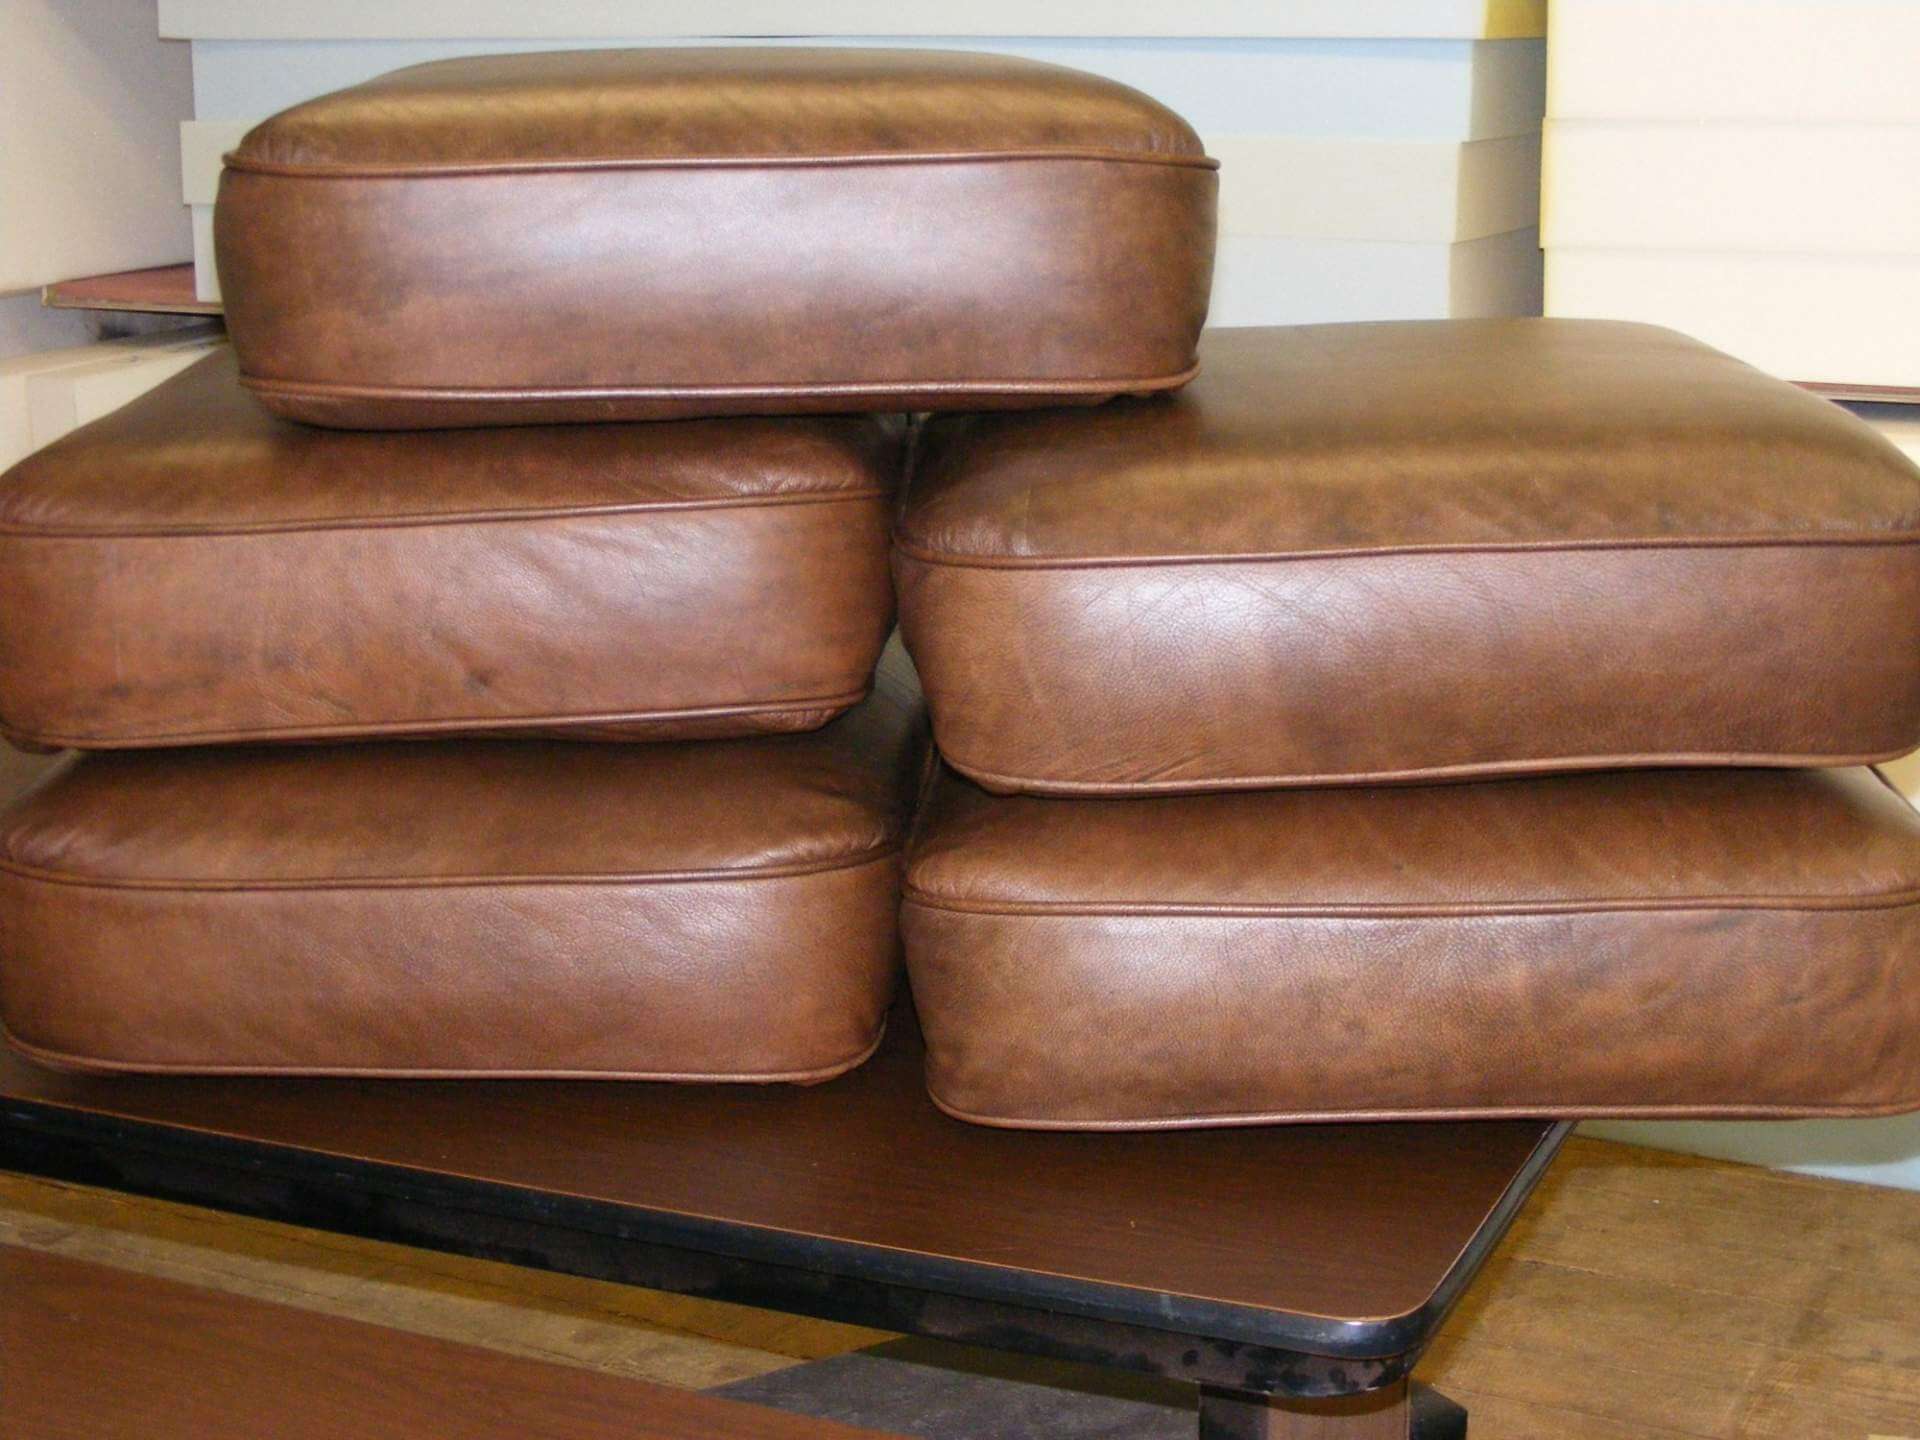 The Best Foam Density For A Couch